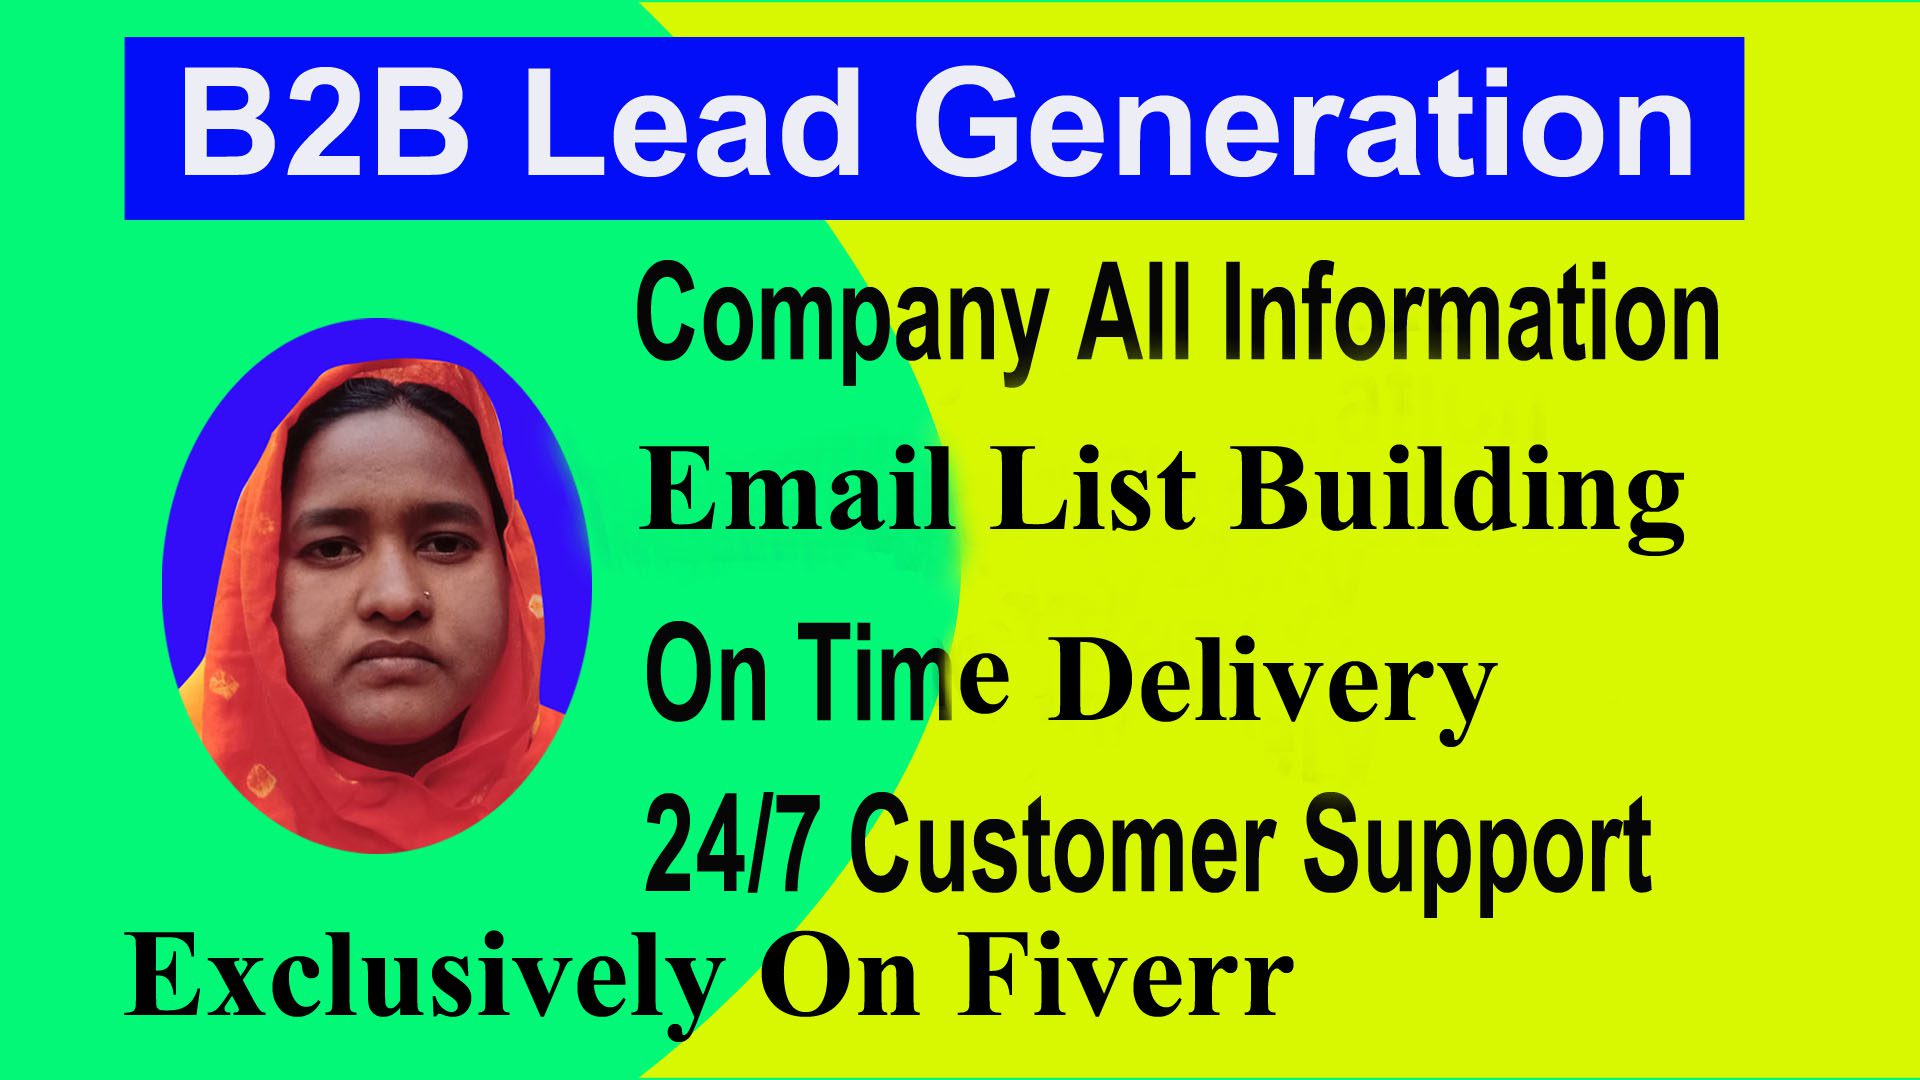 I will provide targeted b2b lead generation and email list building, FiverrBox